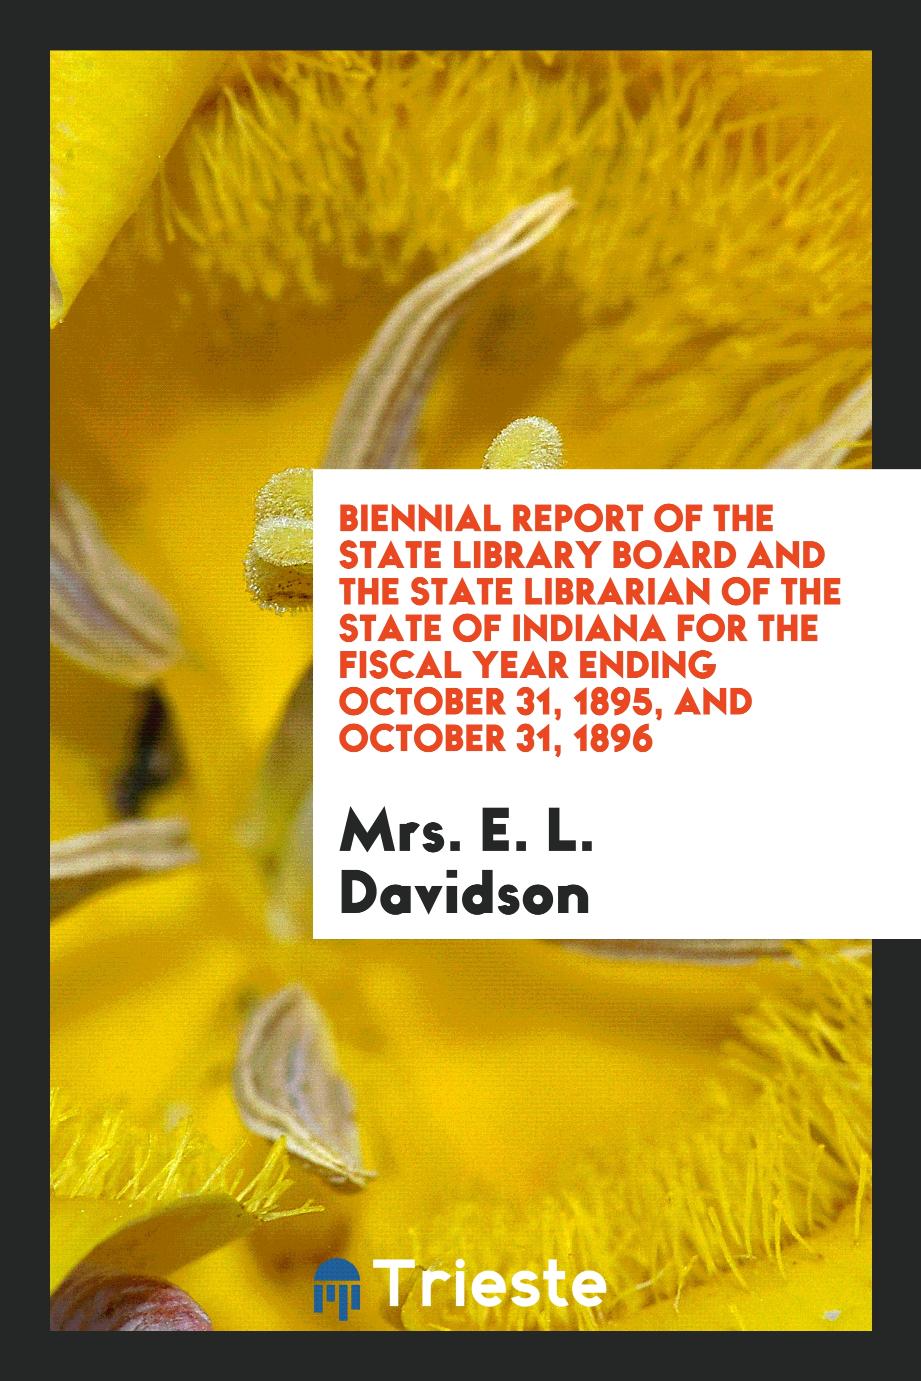 Biennial report of the state library board and the state librarian of the state of Indiana for the fiscal year ending October 31, 1895, and October 31, 1896